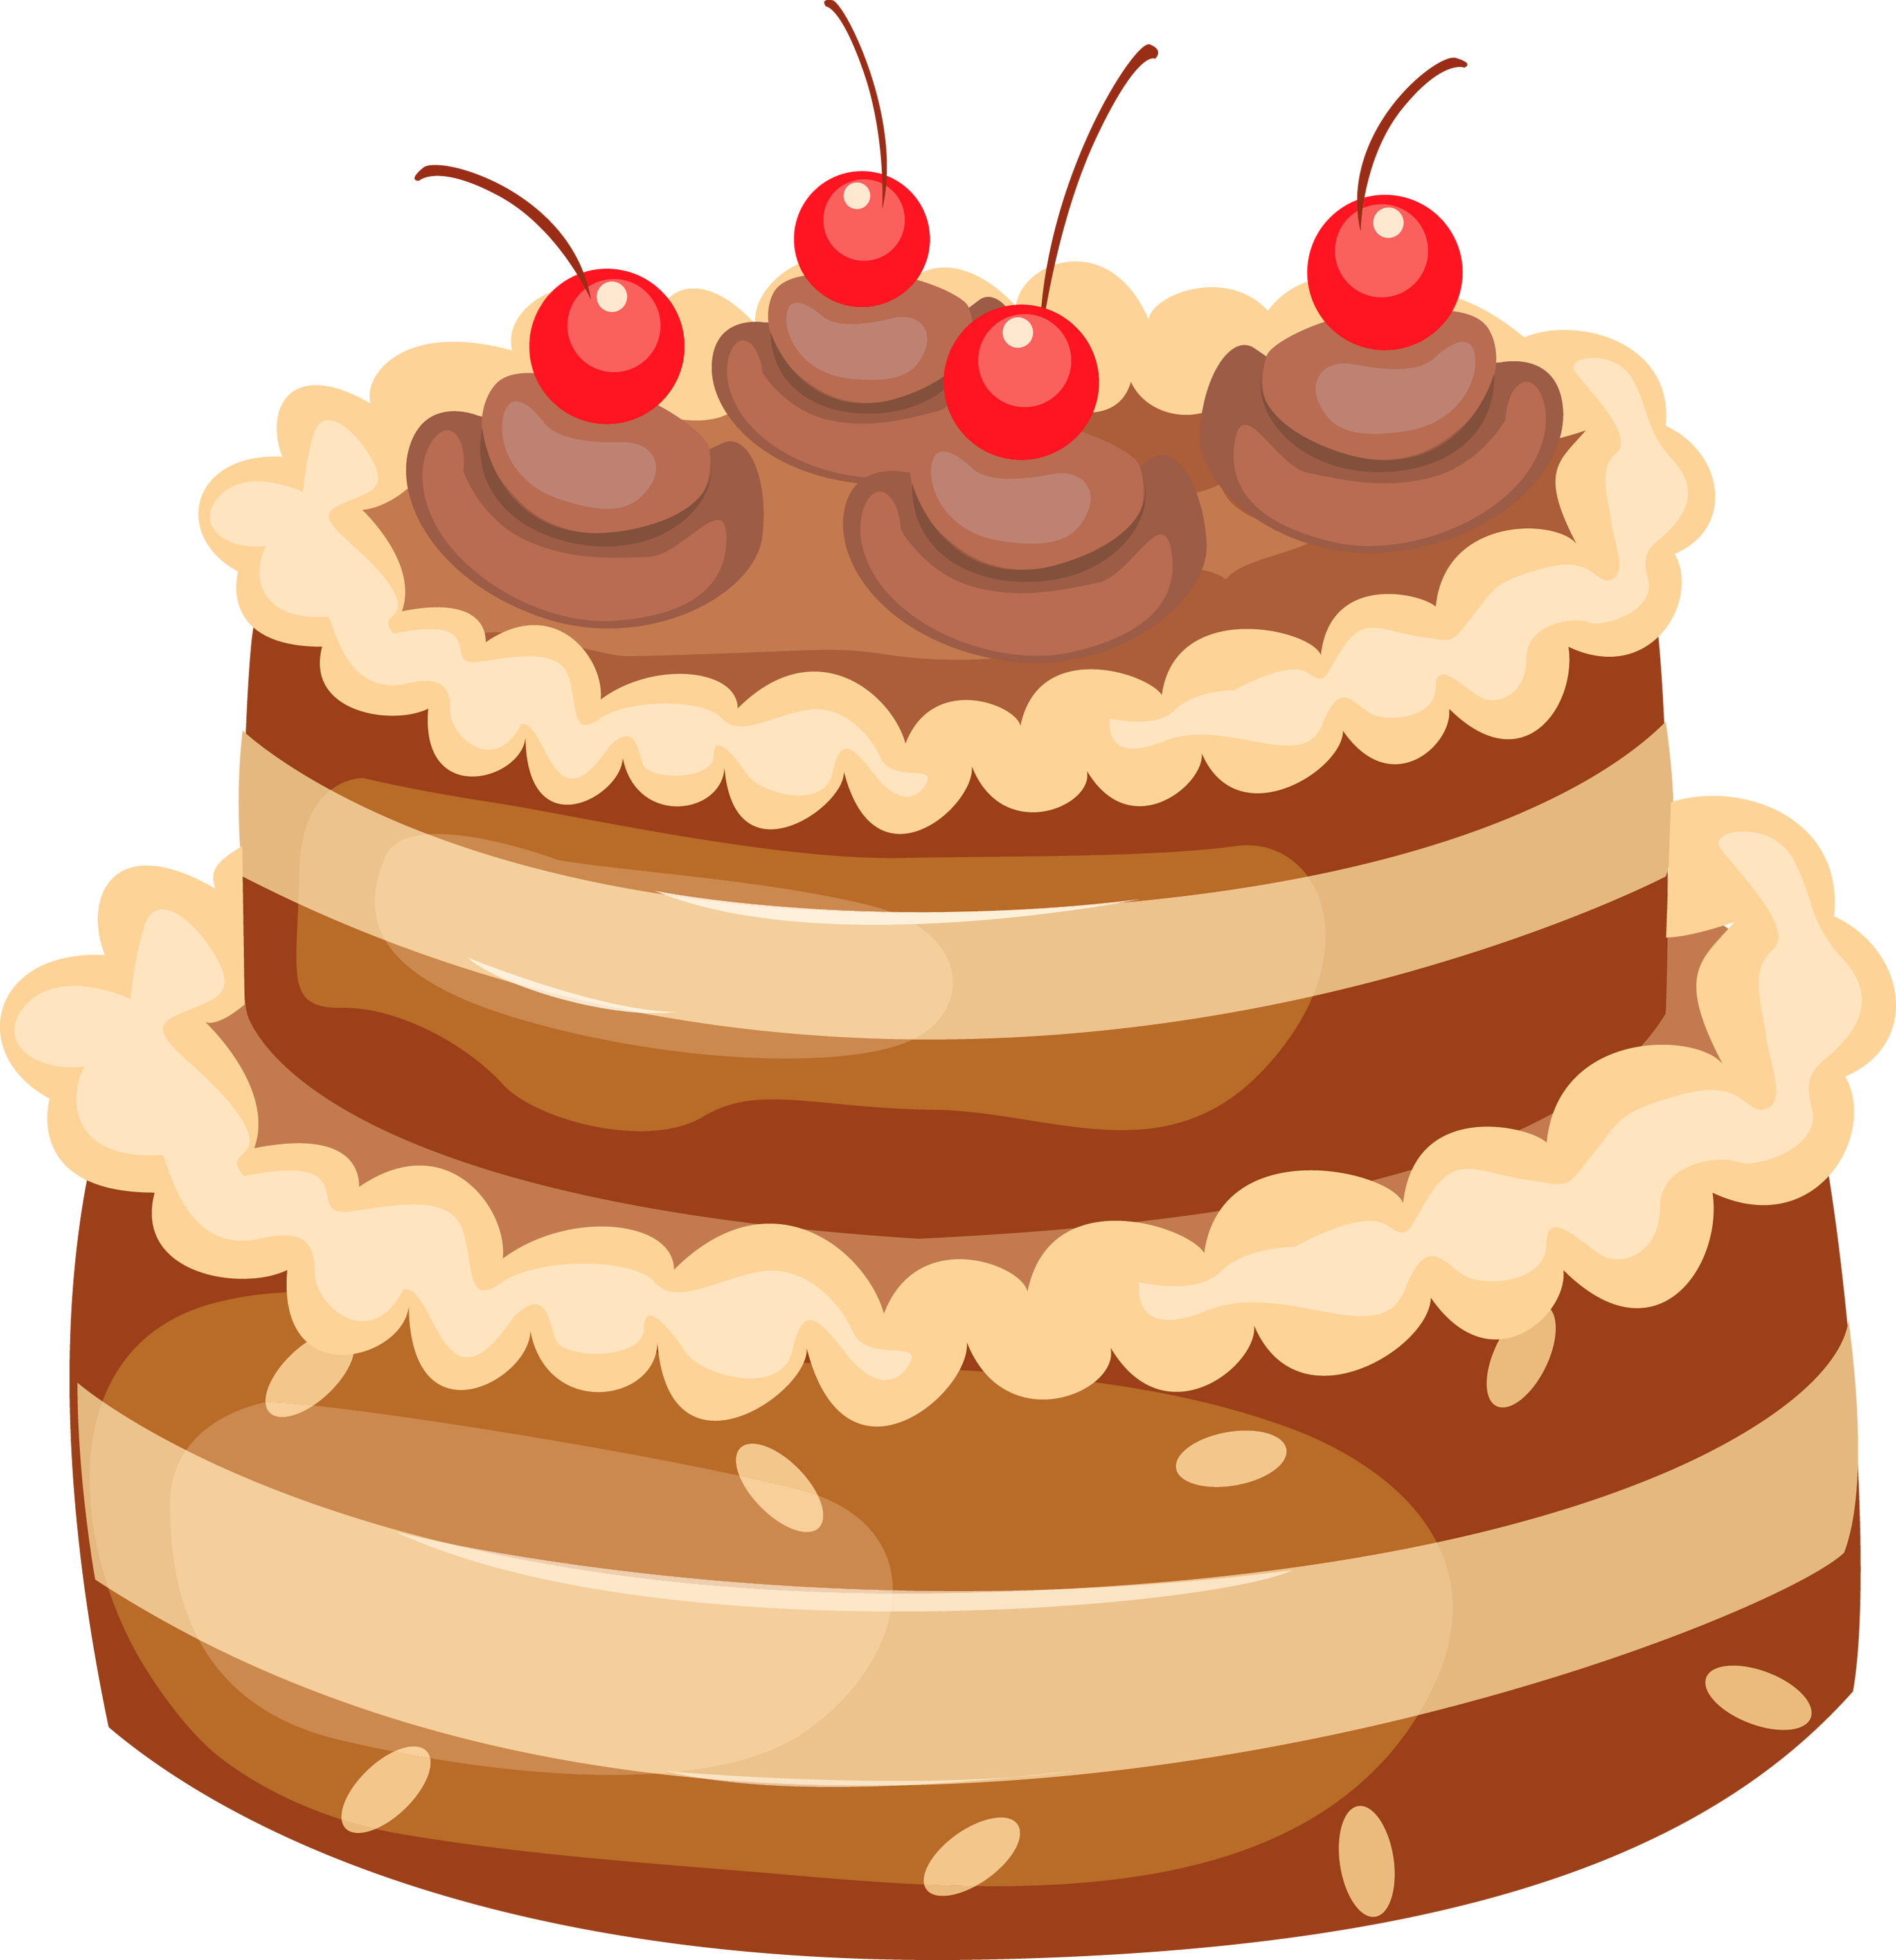 Chocolate Cake Clipart   Clipart Panda   Free Clipart Images